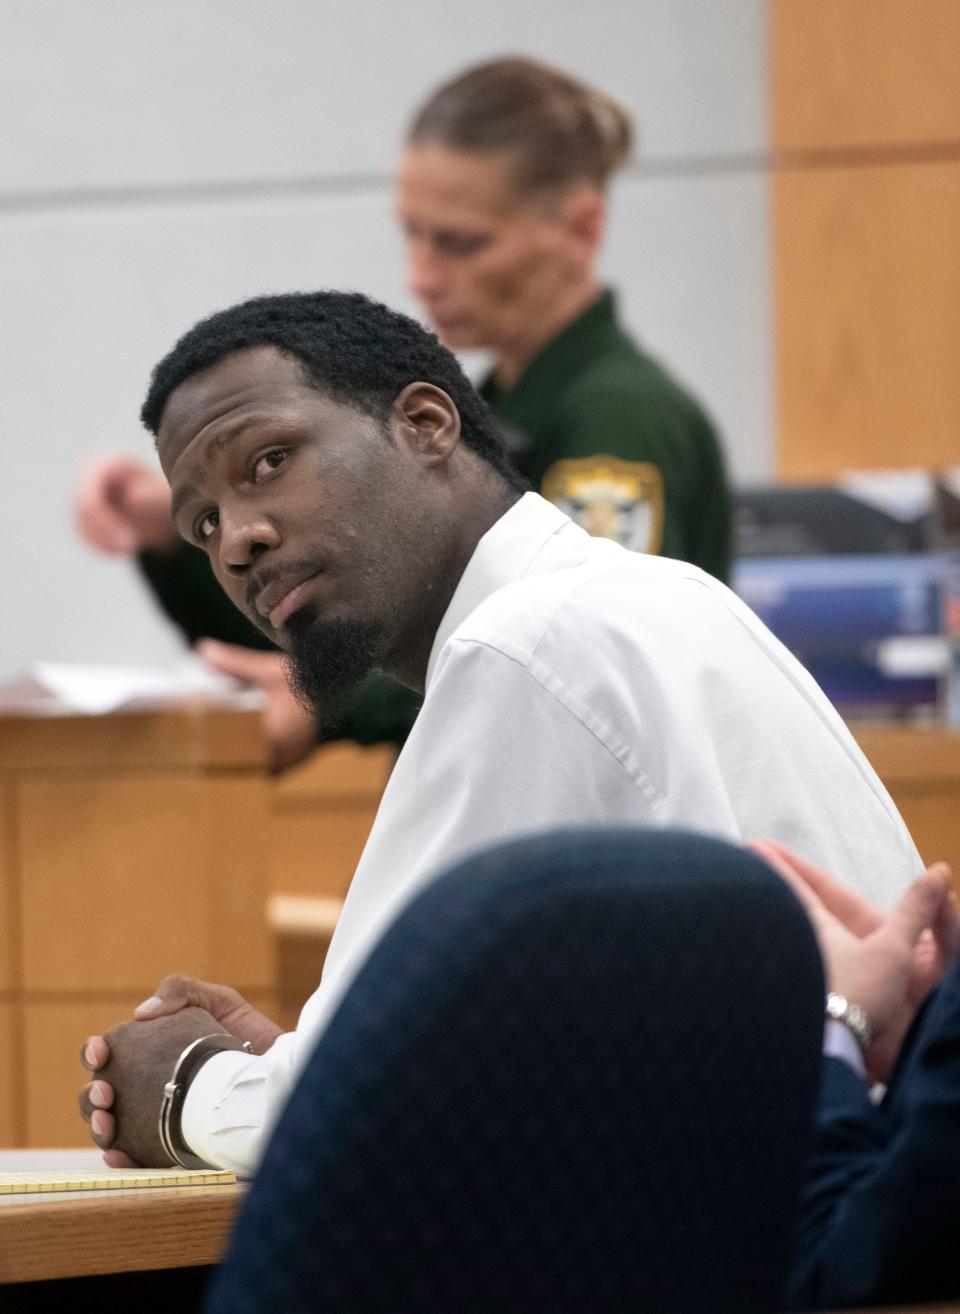 Markell Brent Sawyer appears before Circuit Judge John Simon on Thursday, March 23, 2023. Sawyer was convicted of manslaughter for 79-year-old Nelson Sanderson in August 2020 while in Century Correctional Institute.